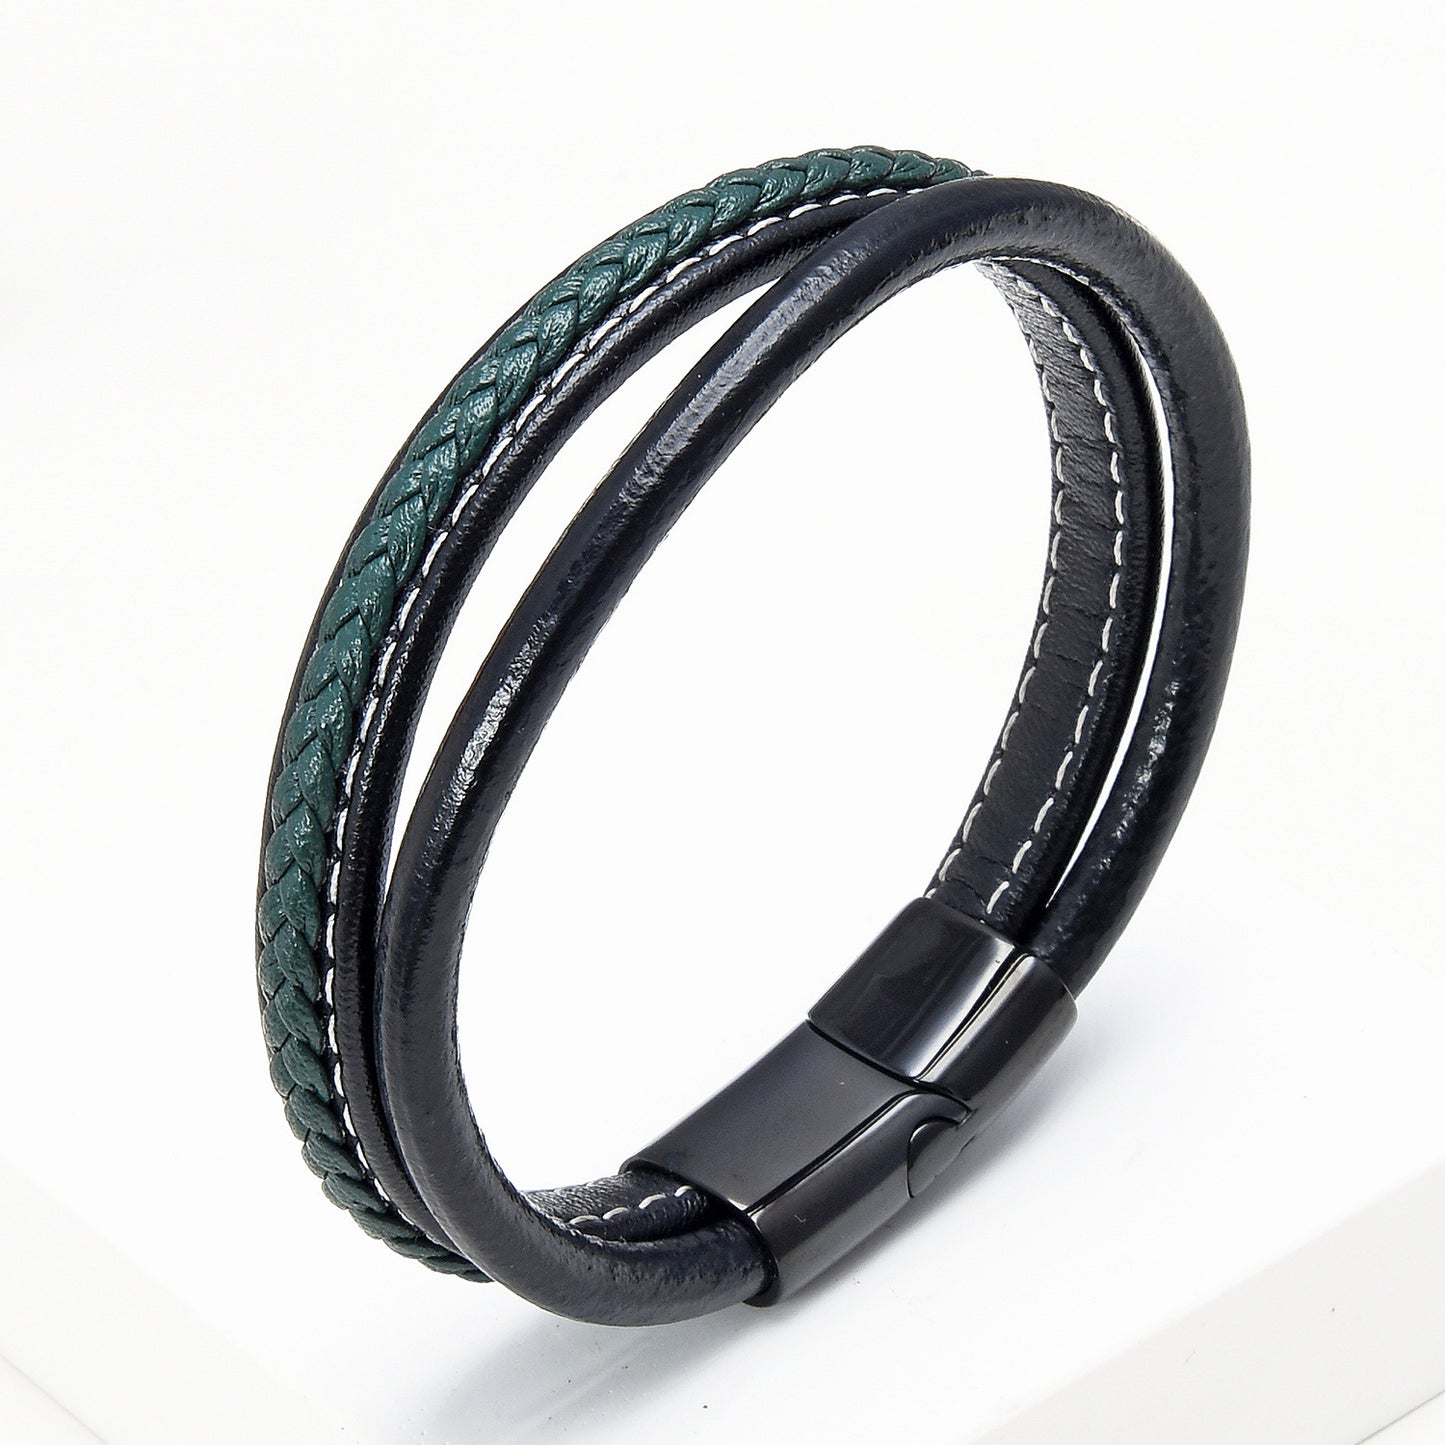 "Braided Genuine Leather Bracelet: A Symbol of Unity and Strength" - The Nile 